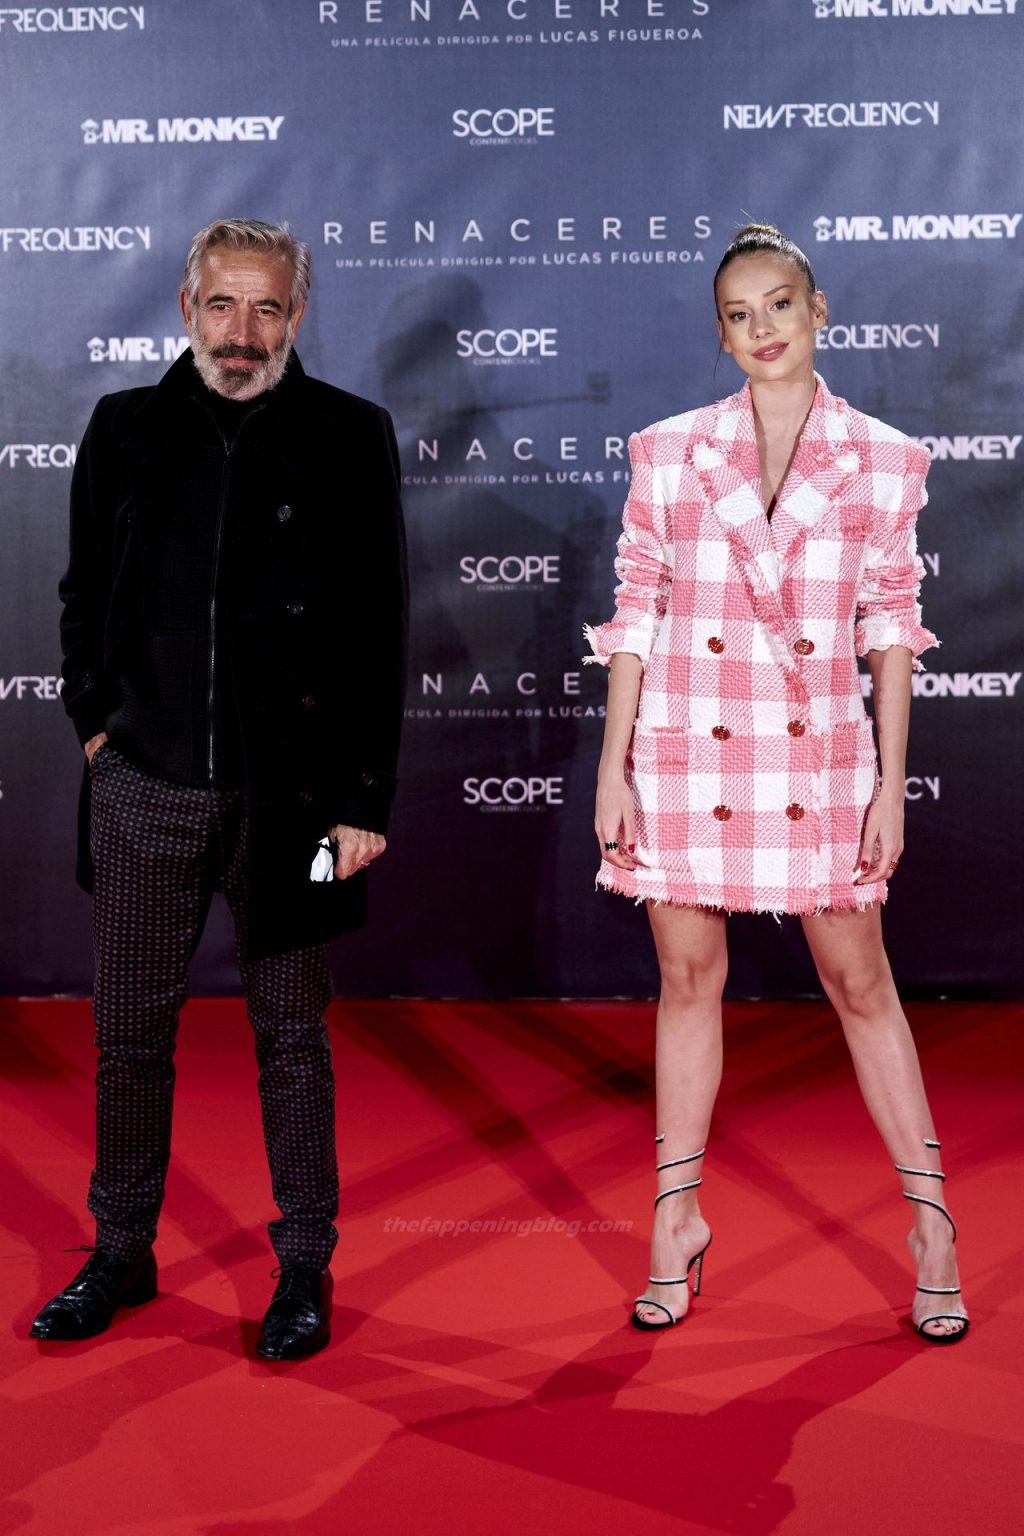 Ester Exposito Shows Her Slender Legs at the Premiere of the Spanish Film “Reborn” (29 Photos)